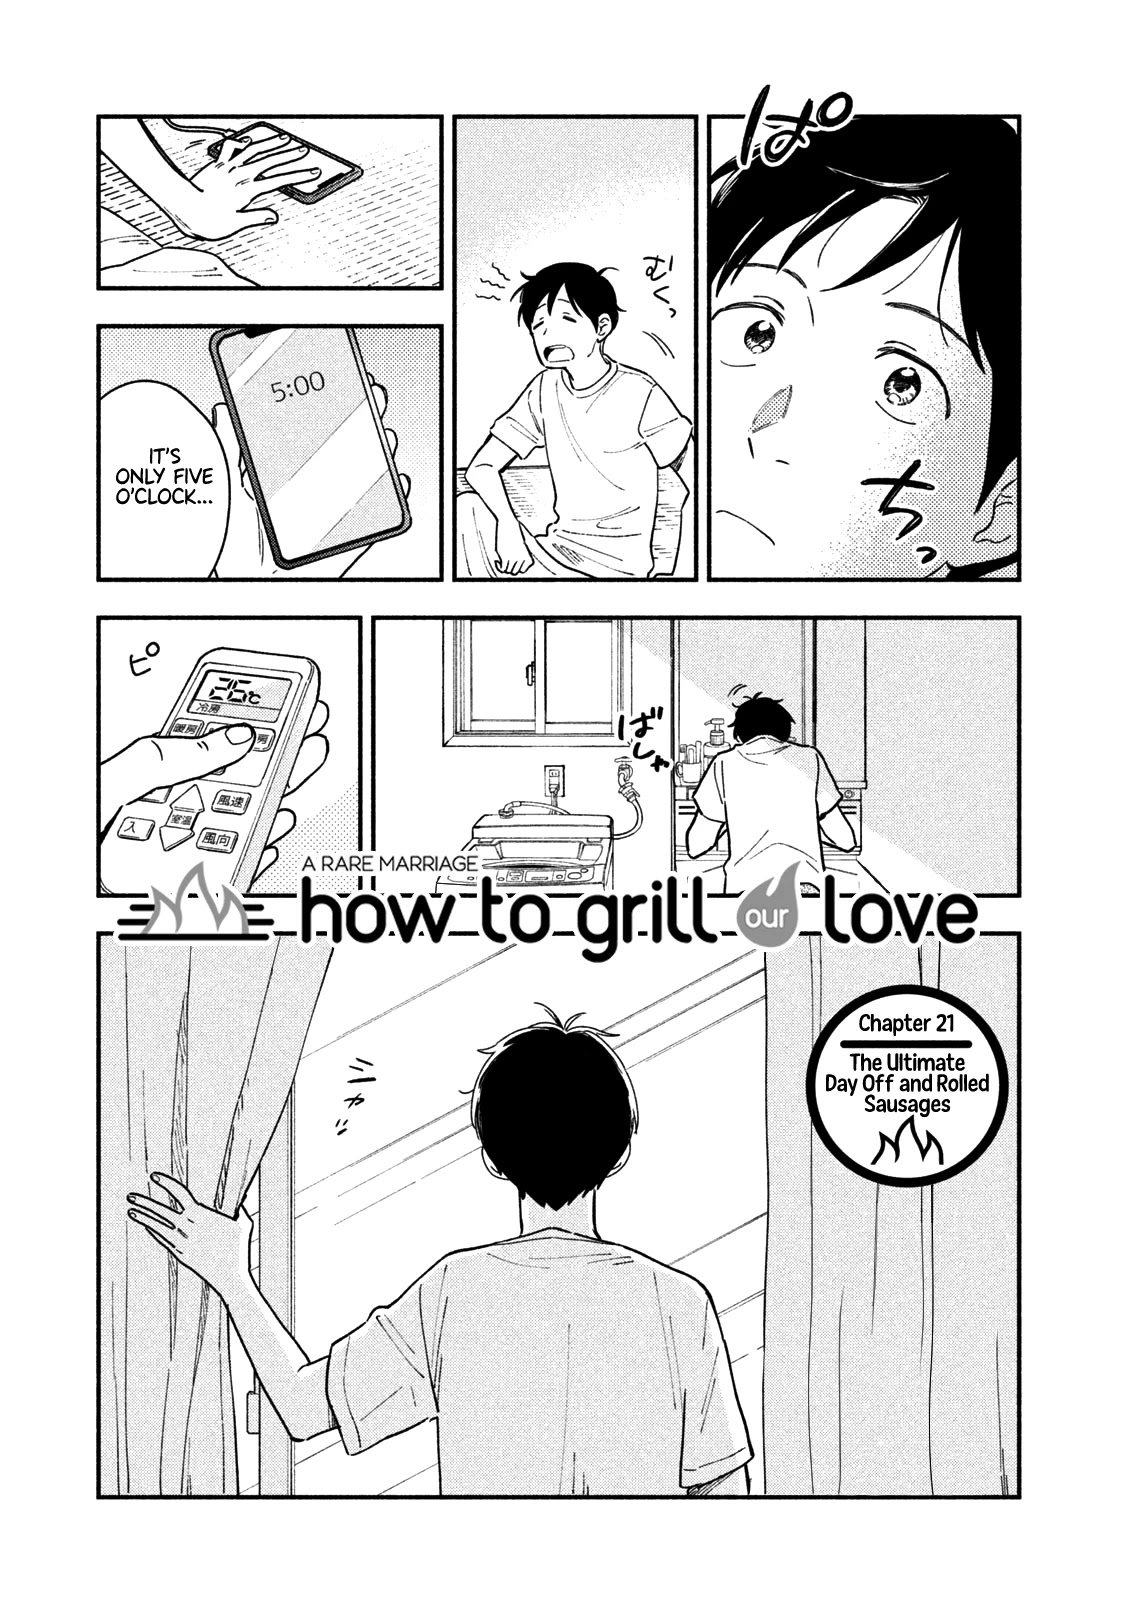 A Rare Marriage: How To Grill Our Love Chapter 21 #2